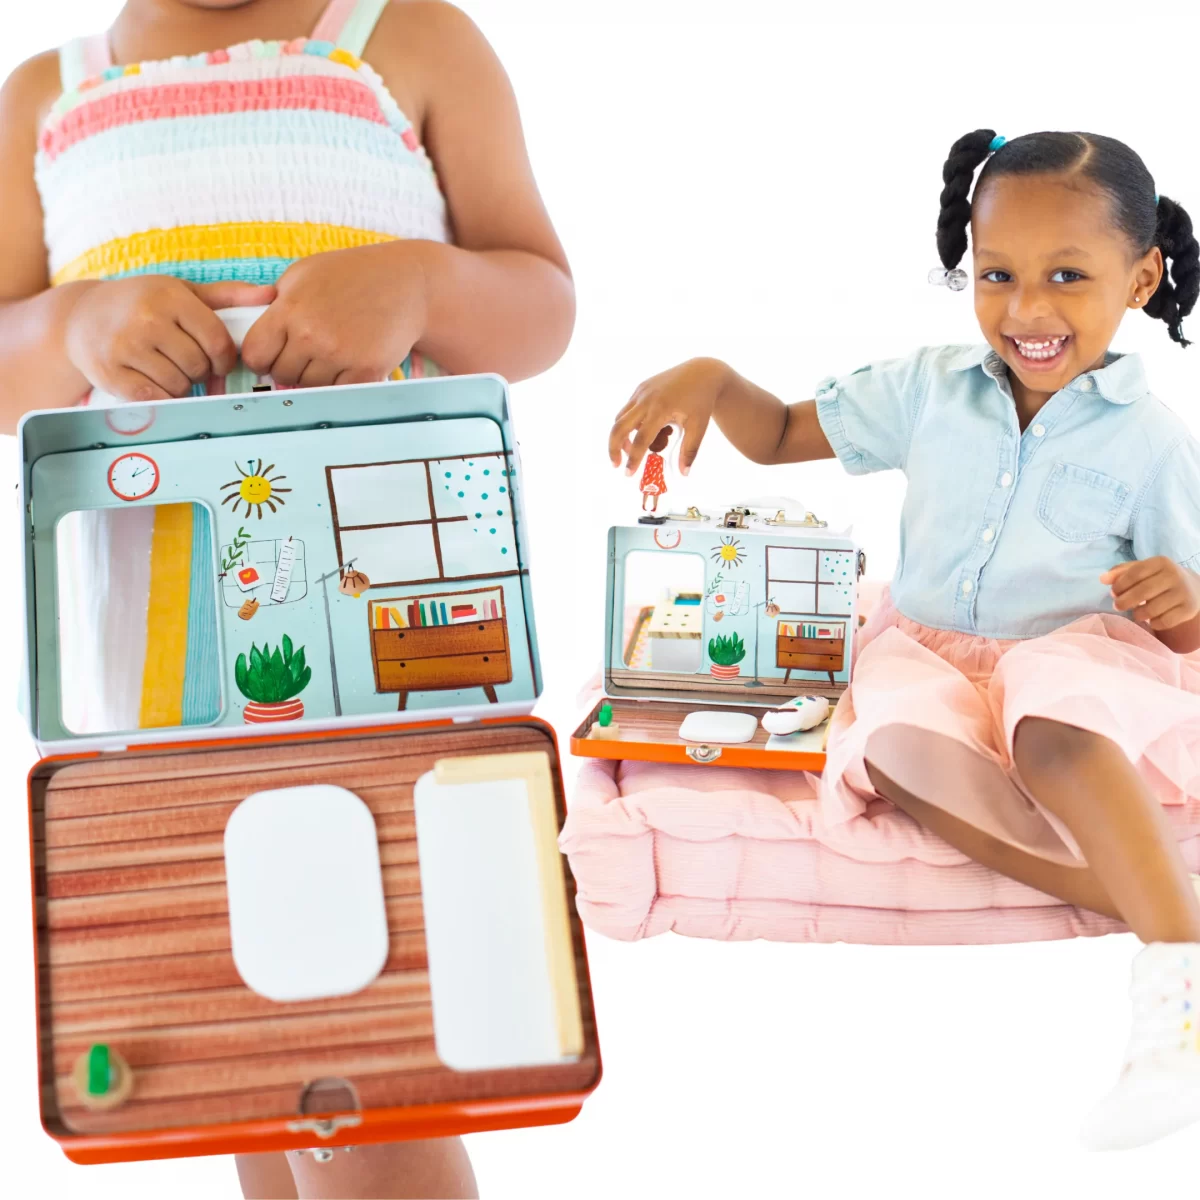 The Perfect Toys For 2 Year Olds To Inspire Wonder And Joy